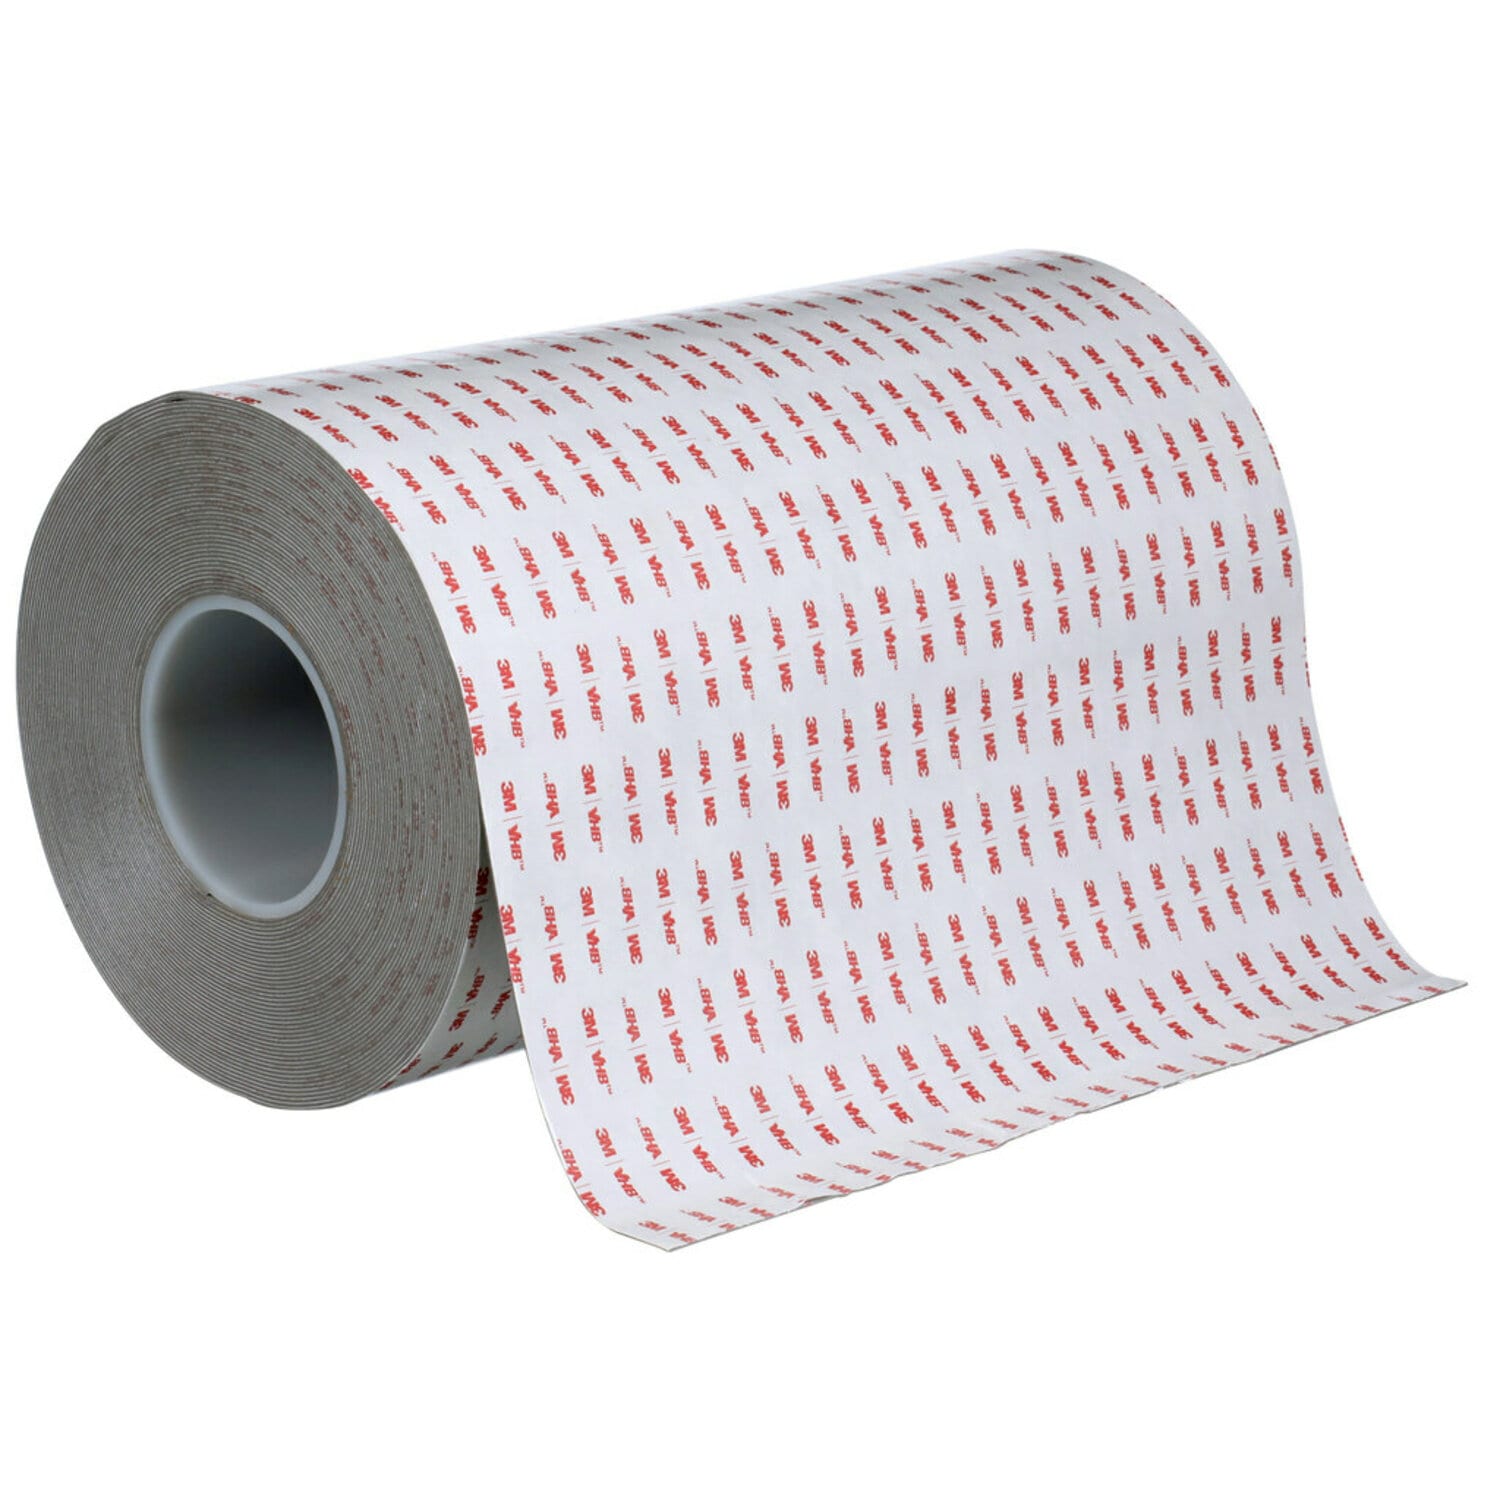 7100273408 - 3M VHB Tape RP+060GP, Gray, 44 in x 36 yd, 25 mil, Paper Liner, 1/Case